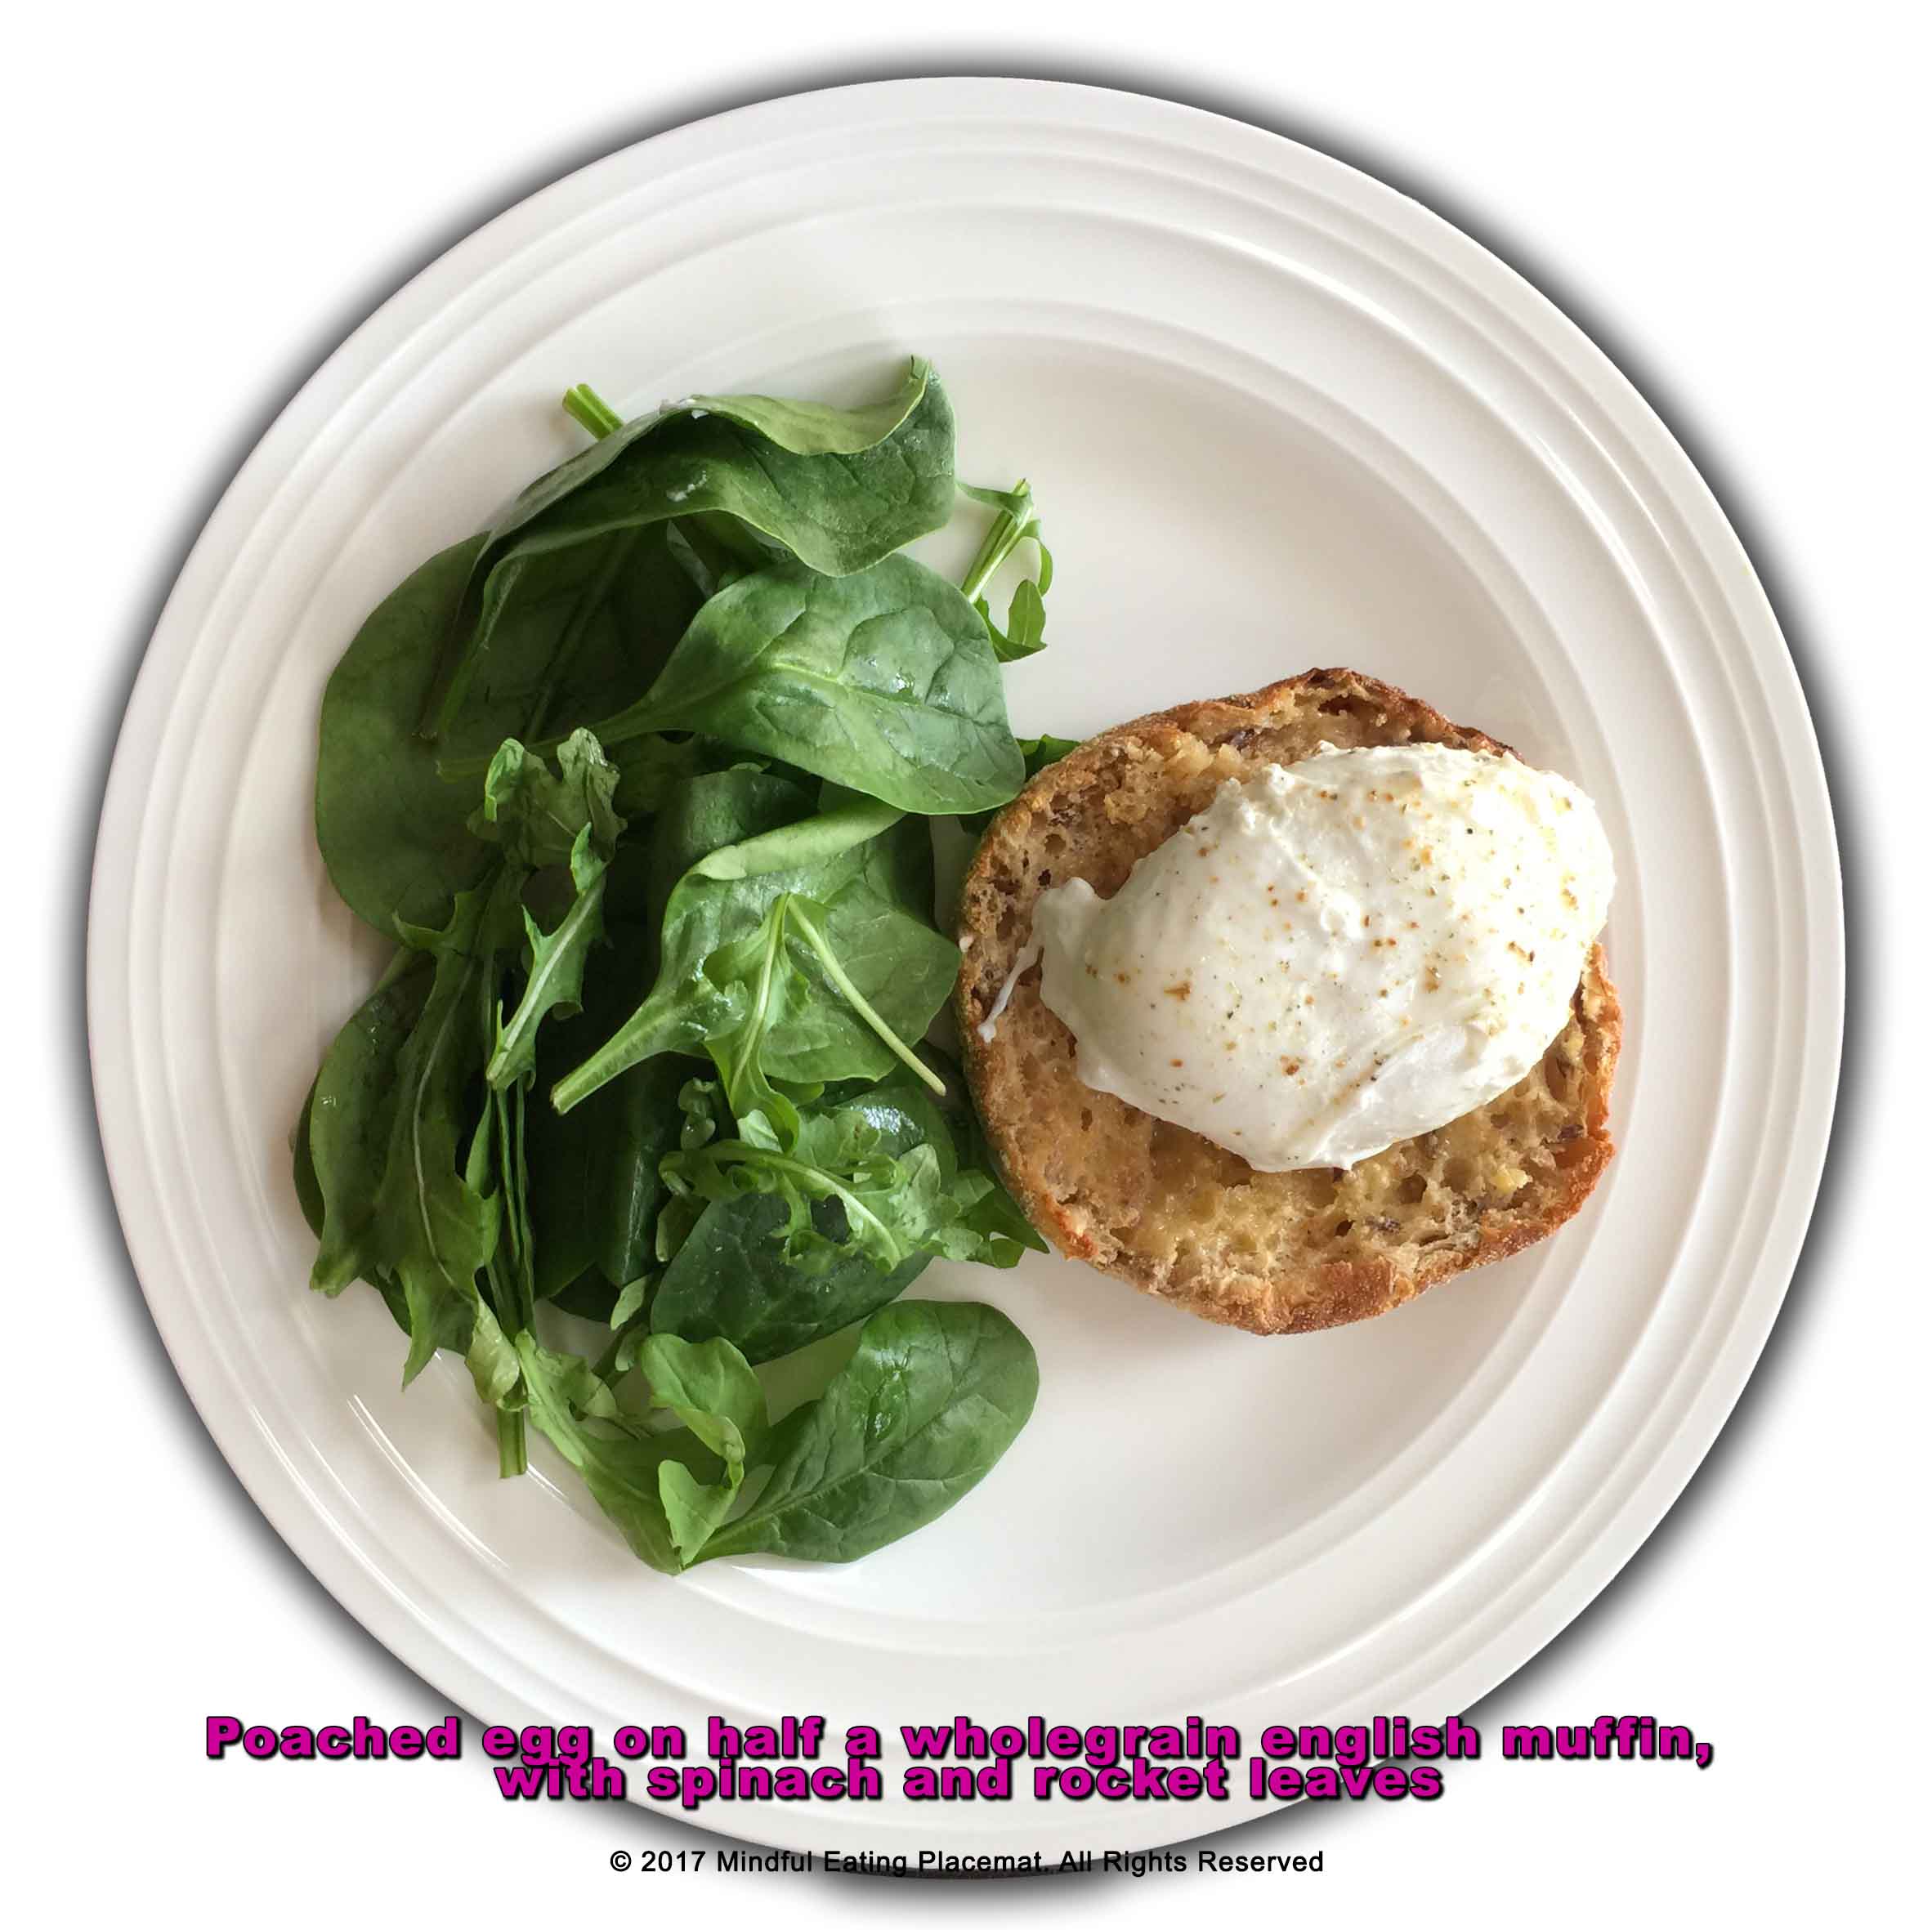 Poached egg on a wholegrain english muffin with spinach and rocket